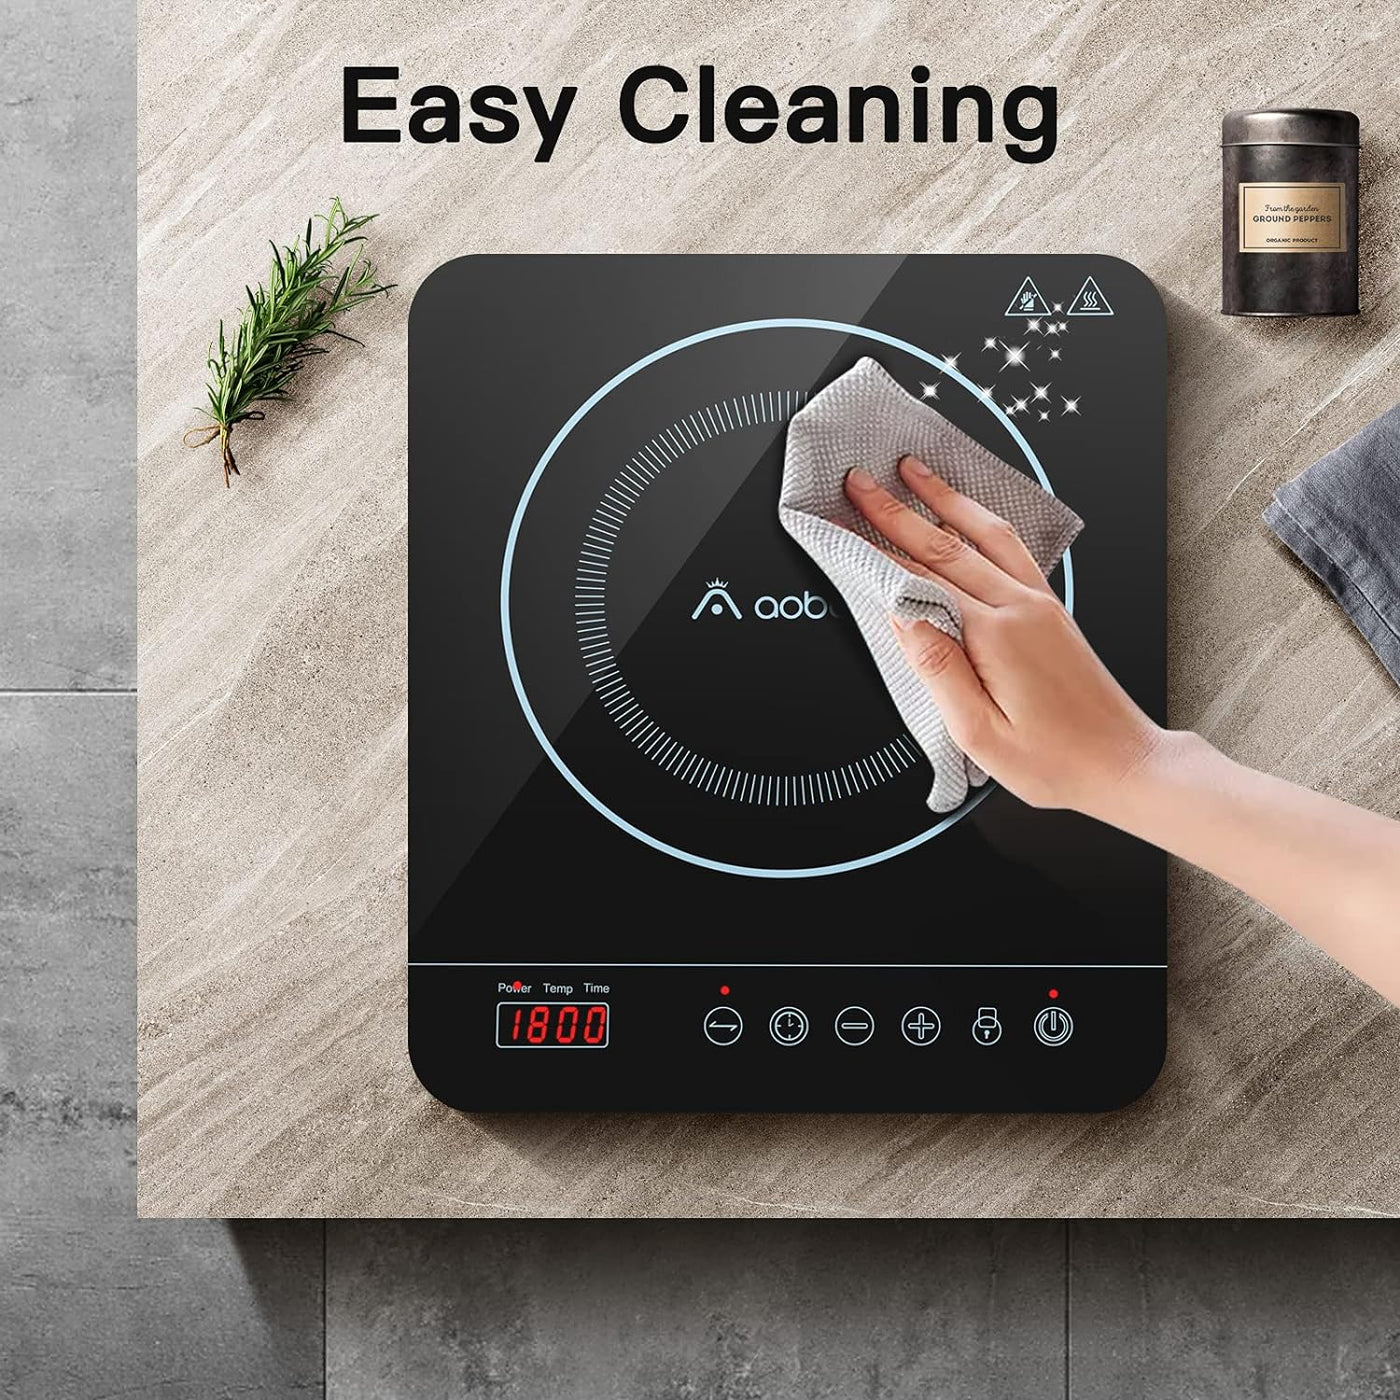 Easy cleaning induction cooktop with crystal glass surface